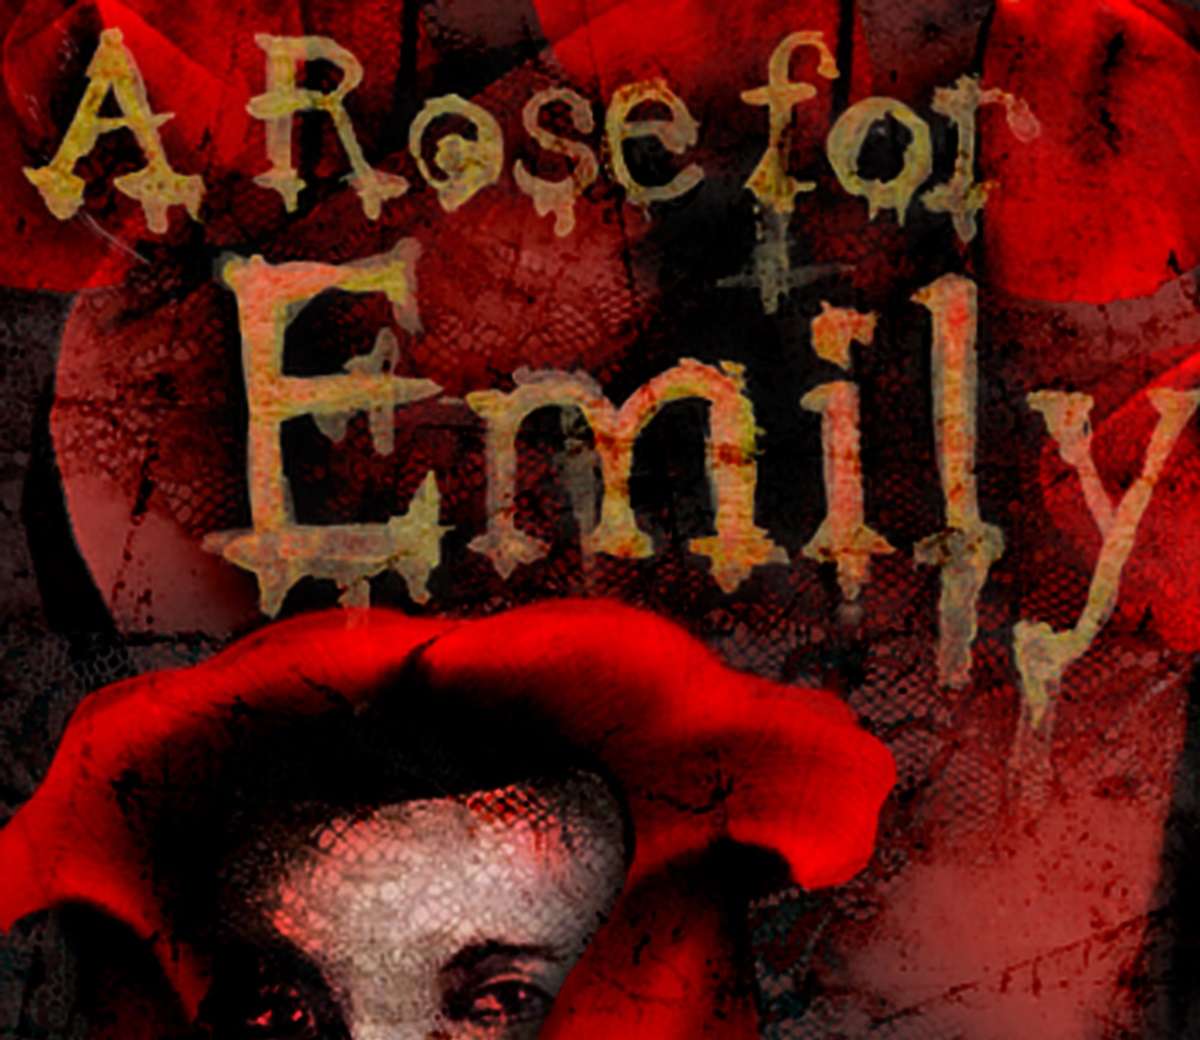 a rose for emily analysis essay